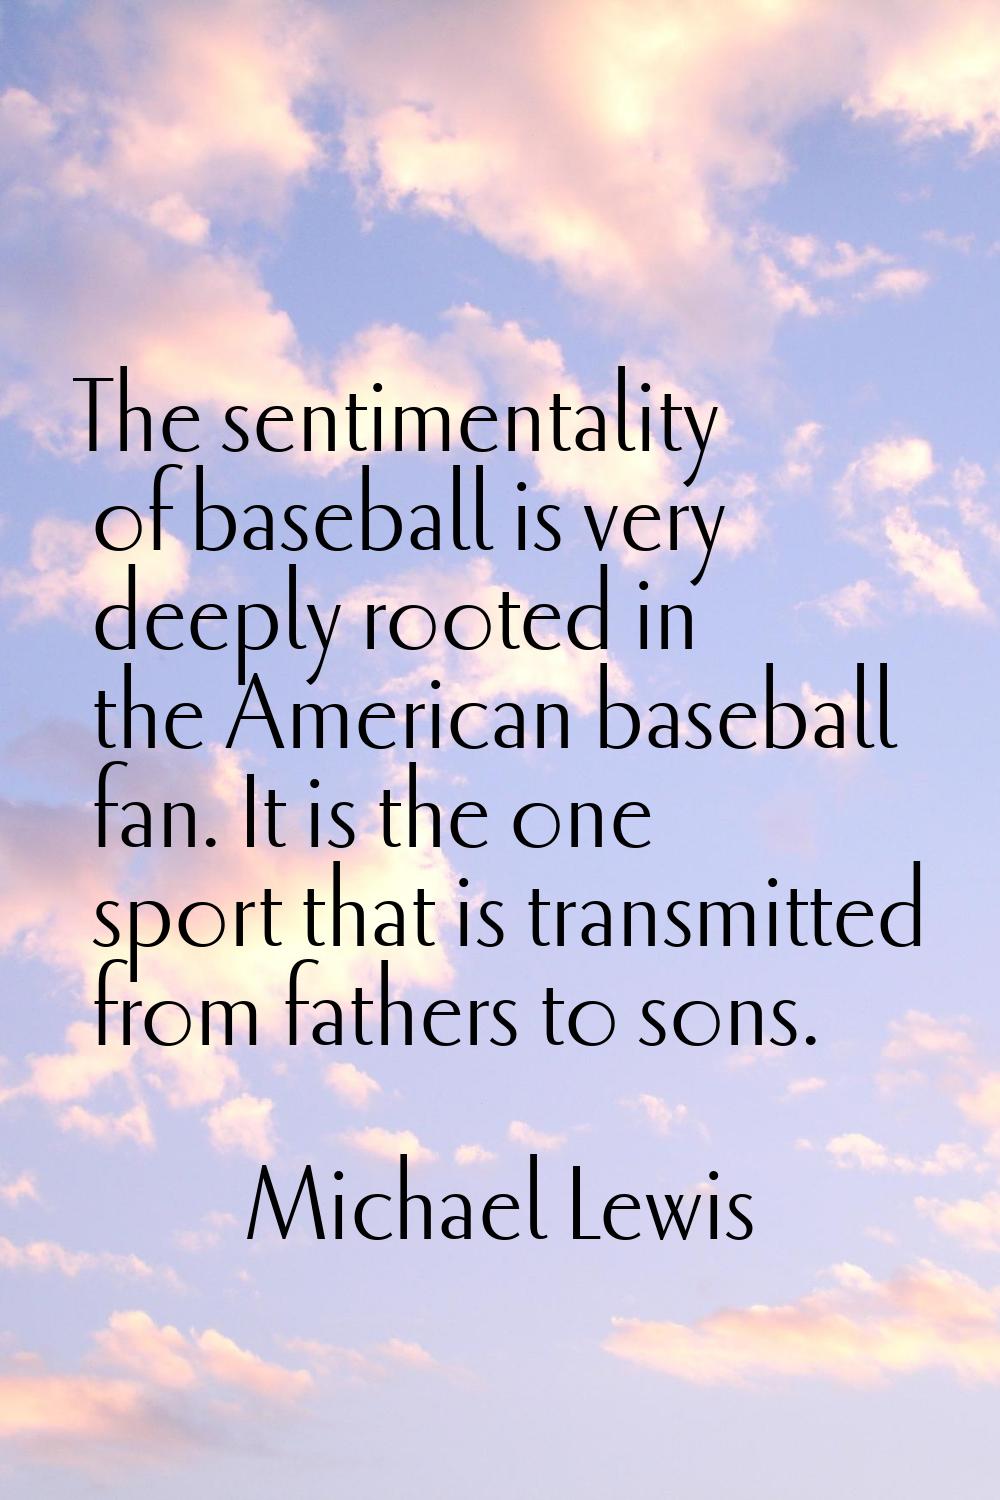 The sentimentality of baseball is very deeply rooted in the American baseball fan. It is the one sp